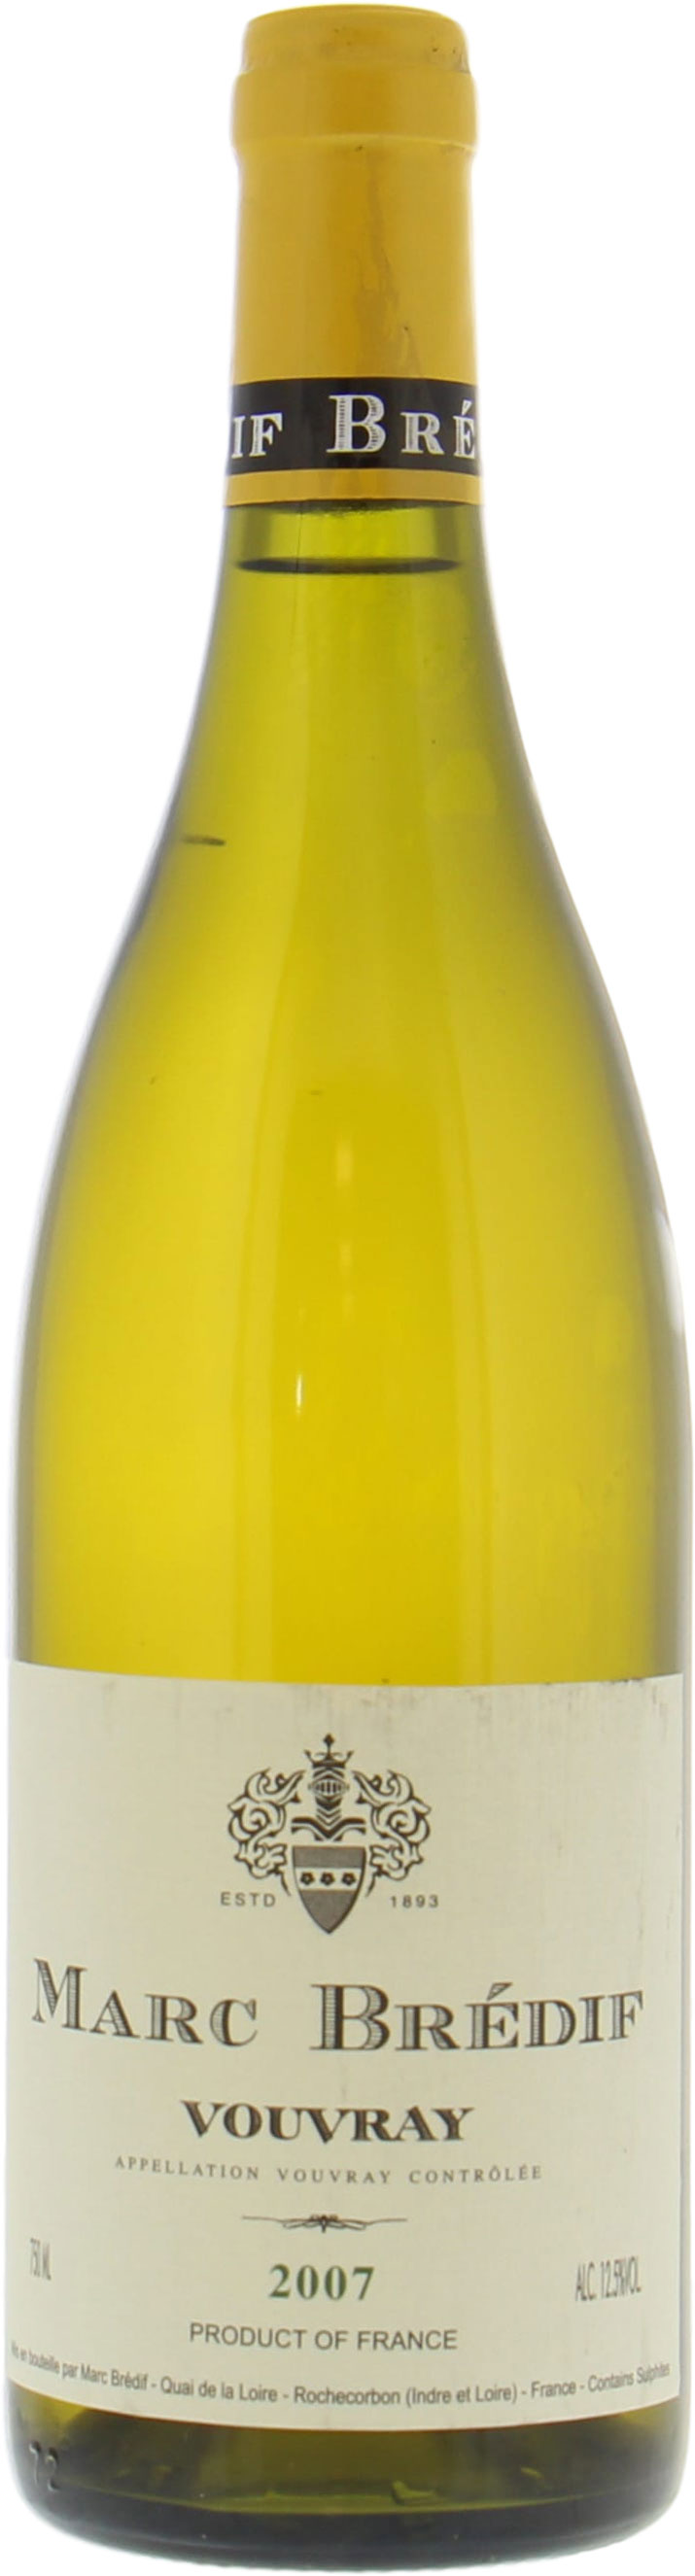 Marc Bredif - Vouvray Grande Annee 2007 Perfect